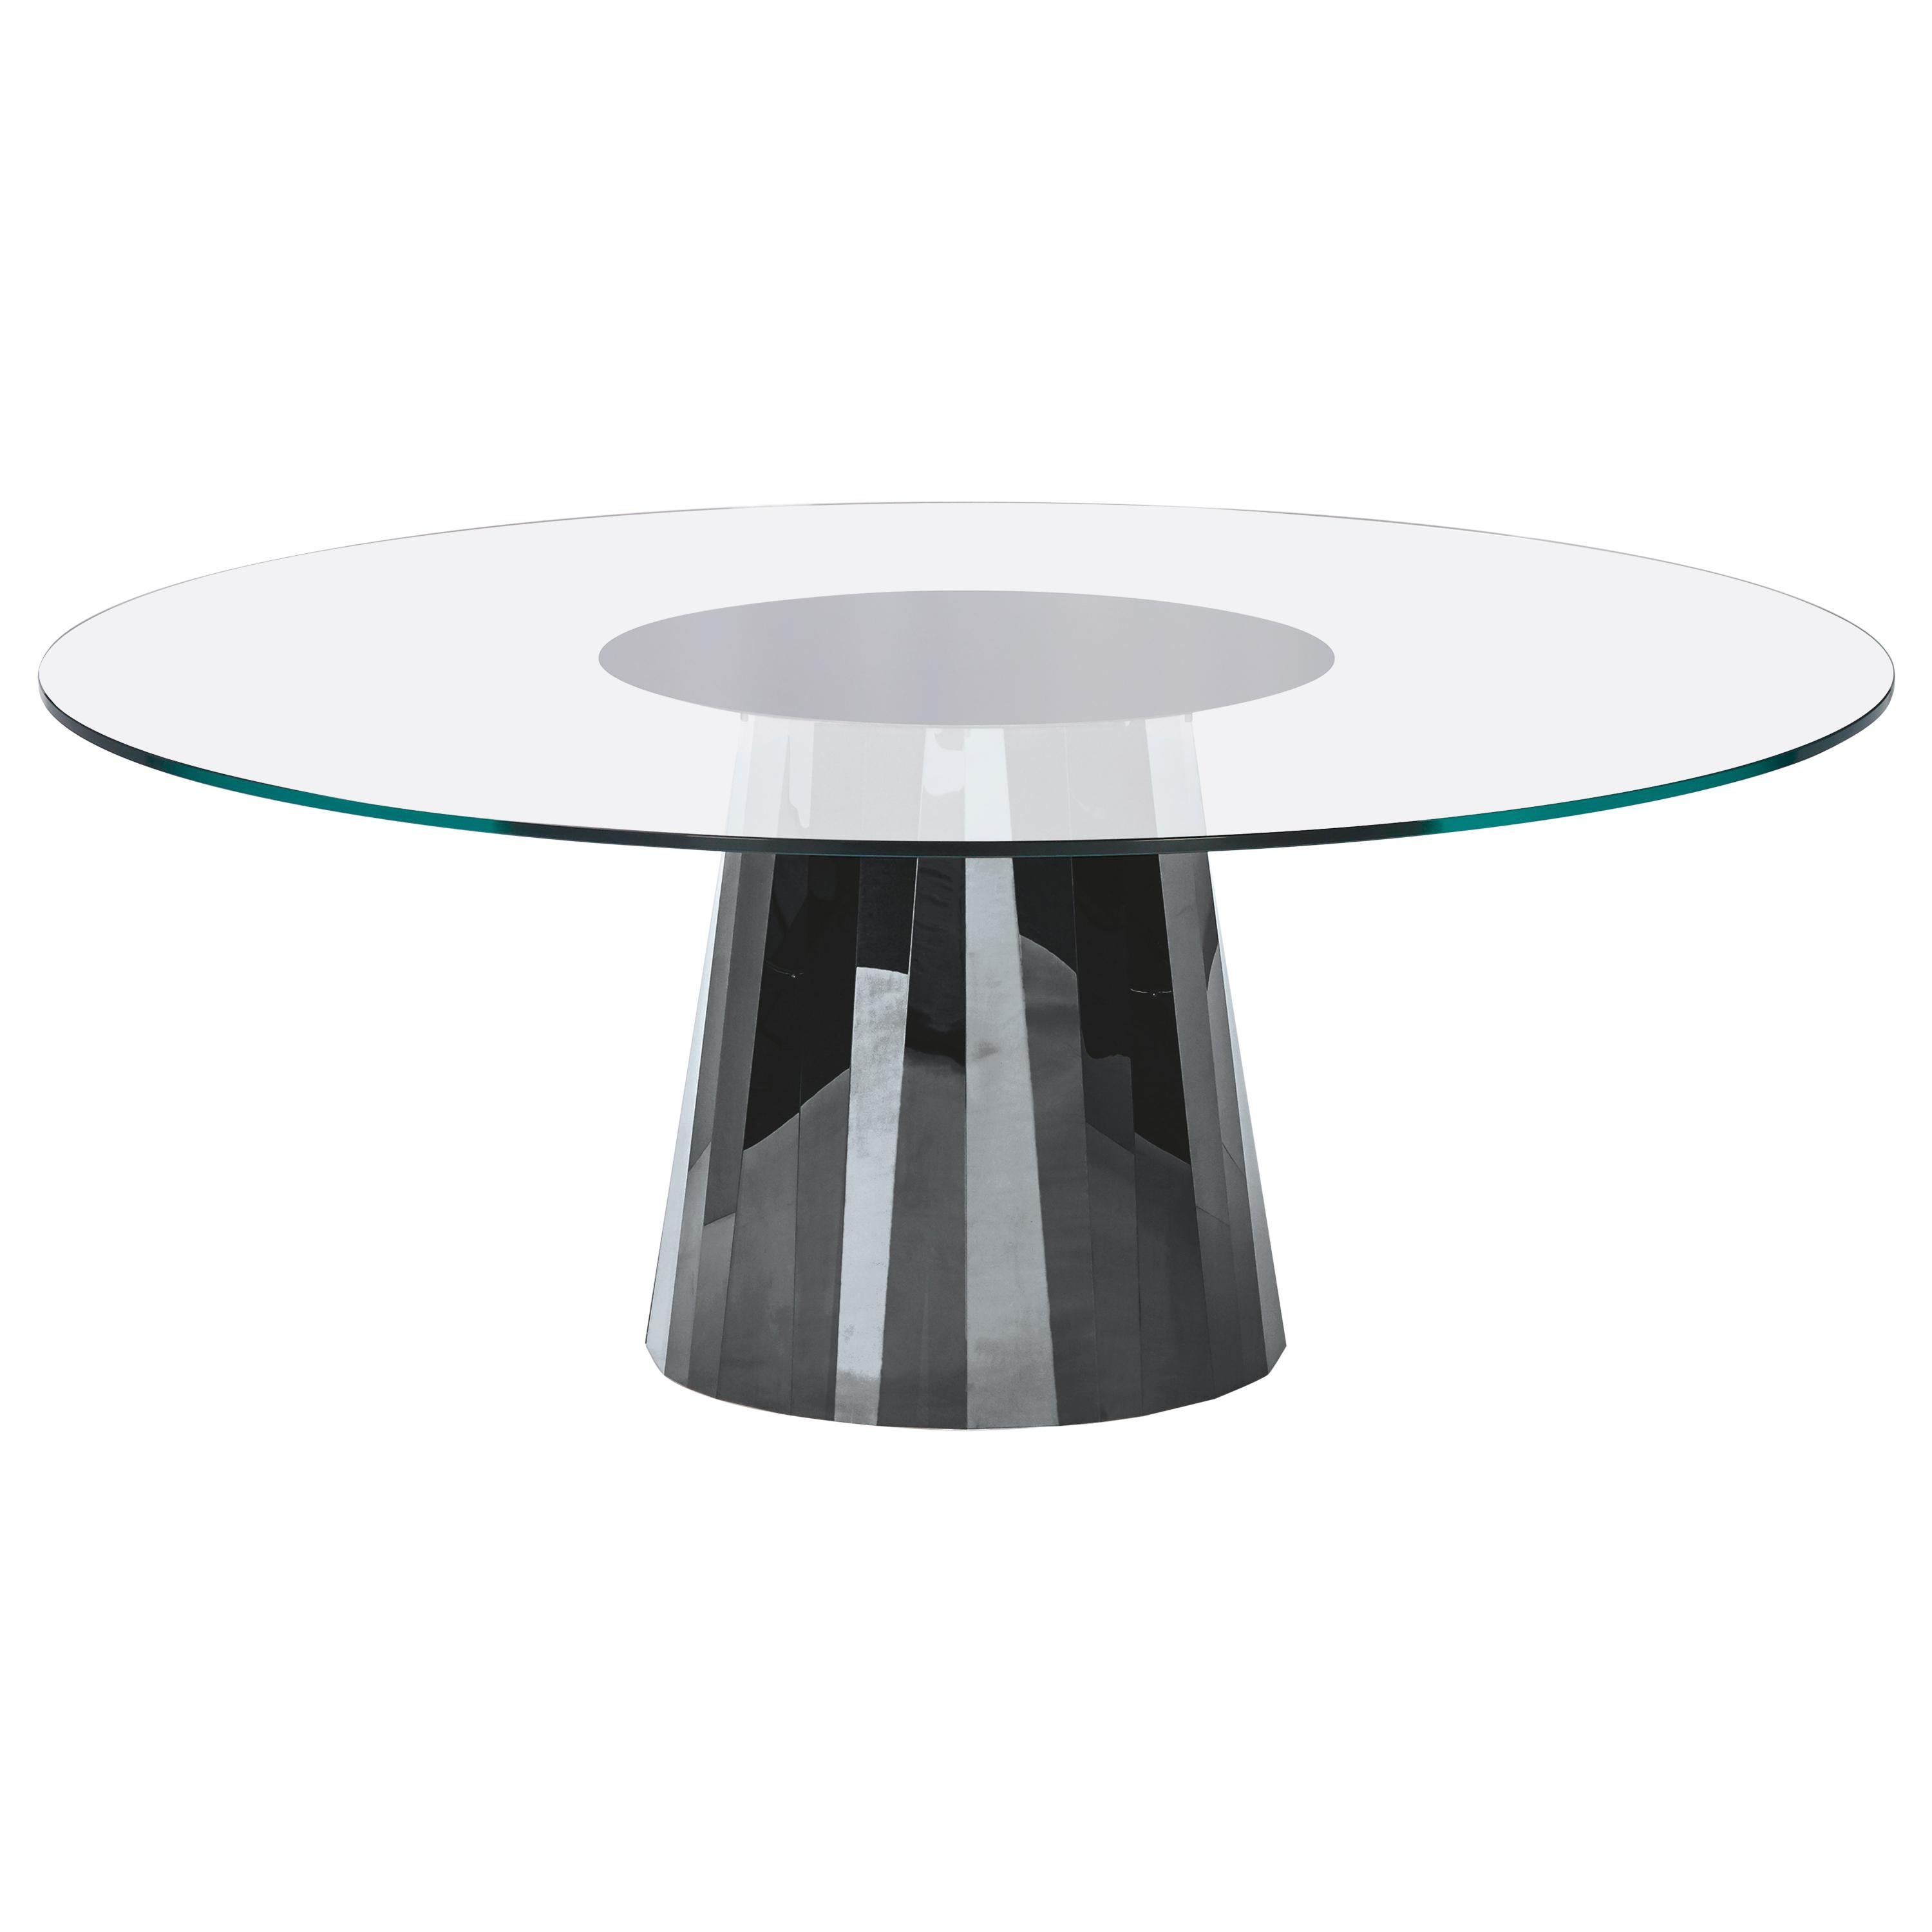 ClassiCon Pli Table in Black with Crystal Glass Top by Victoria Wilmotte